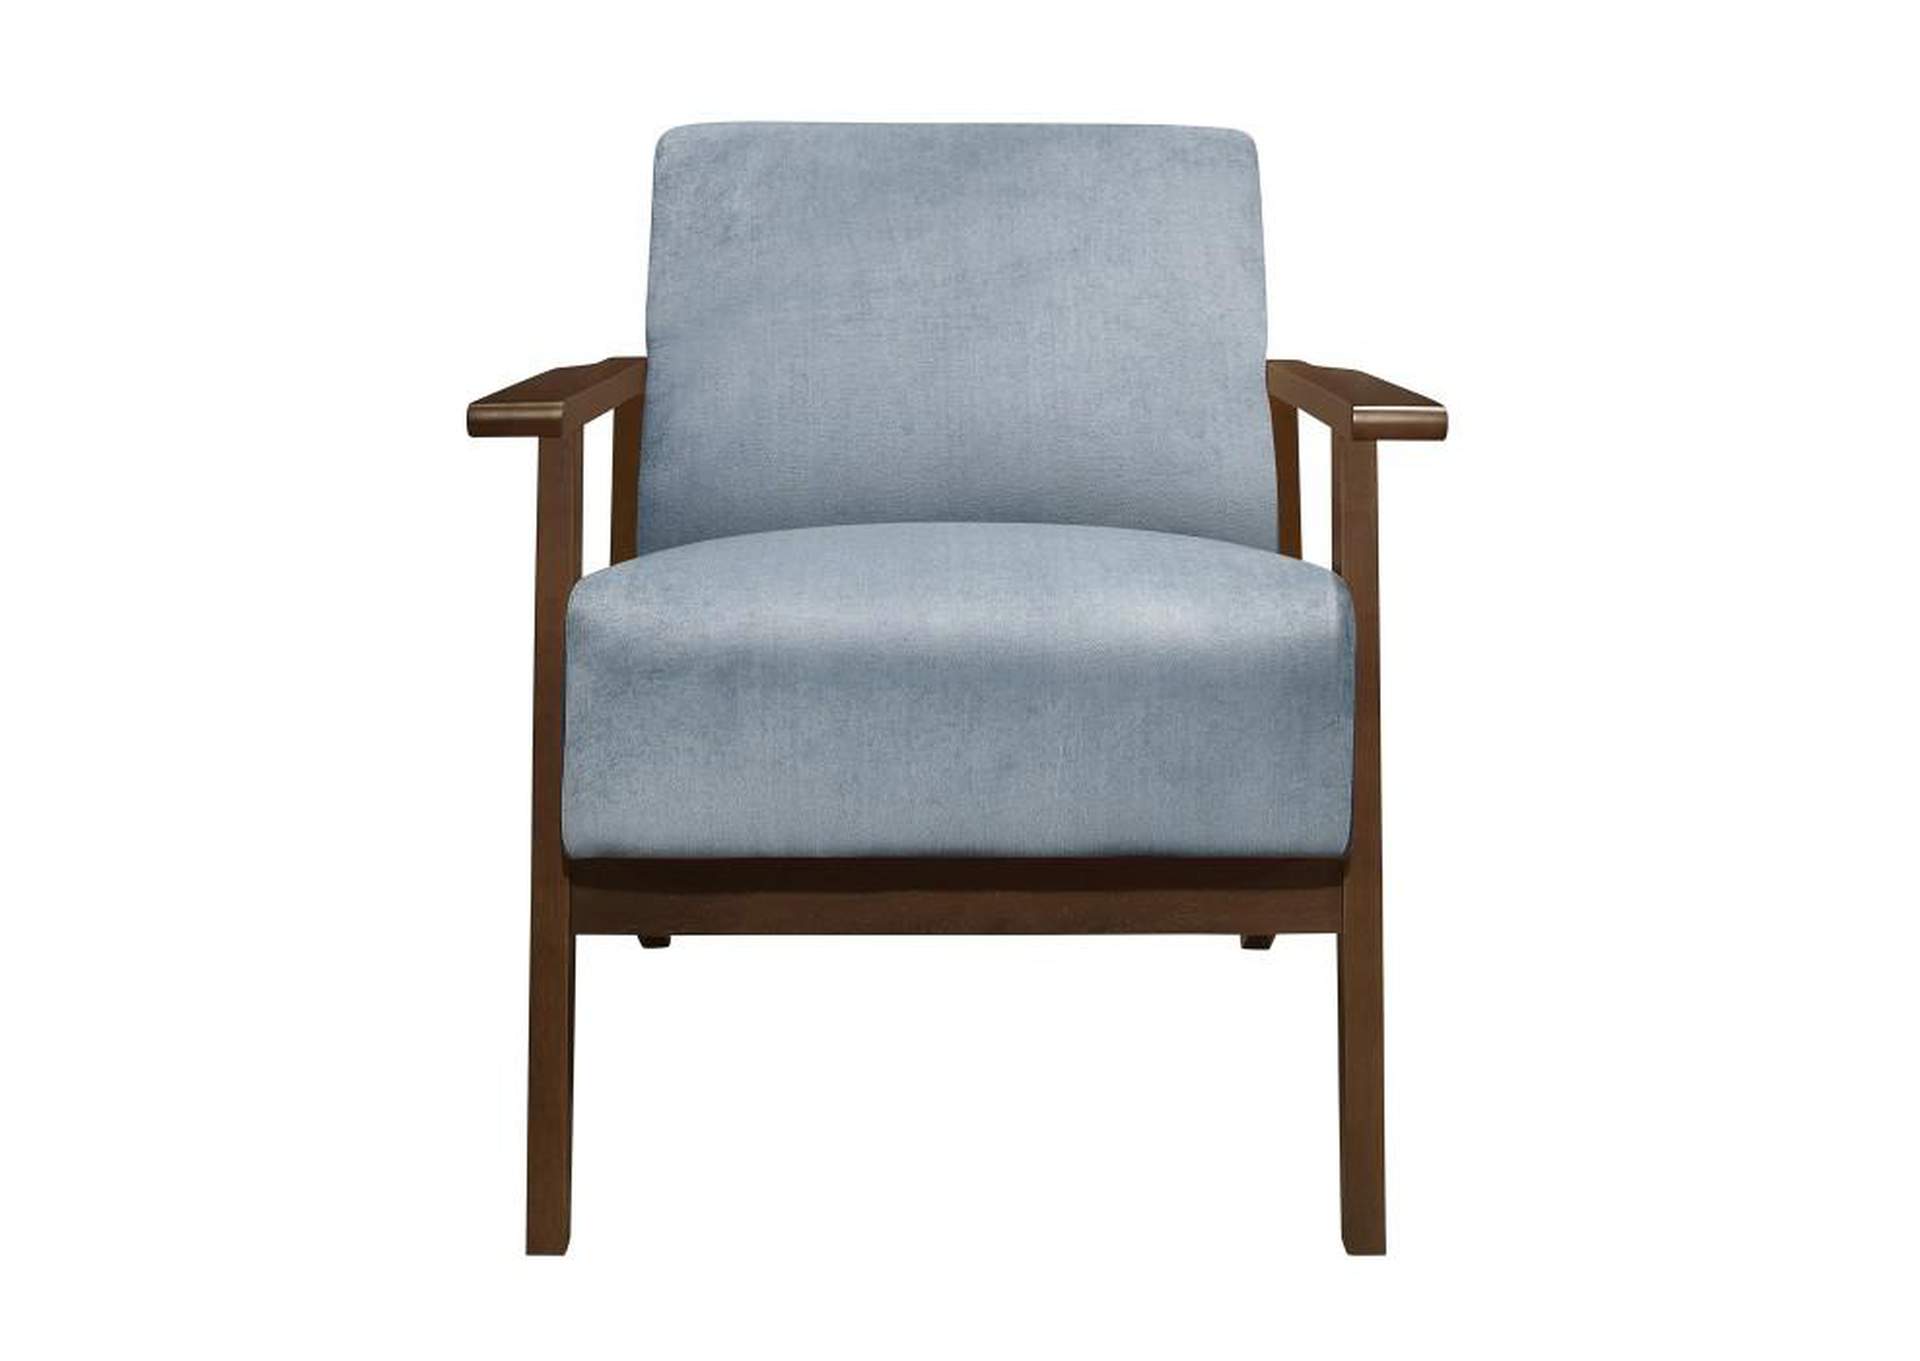 August Accent Chair,Homelegance